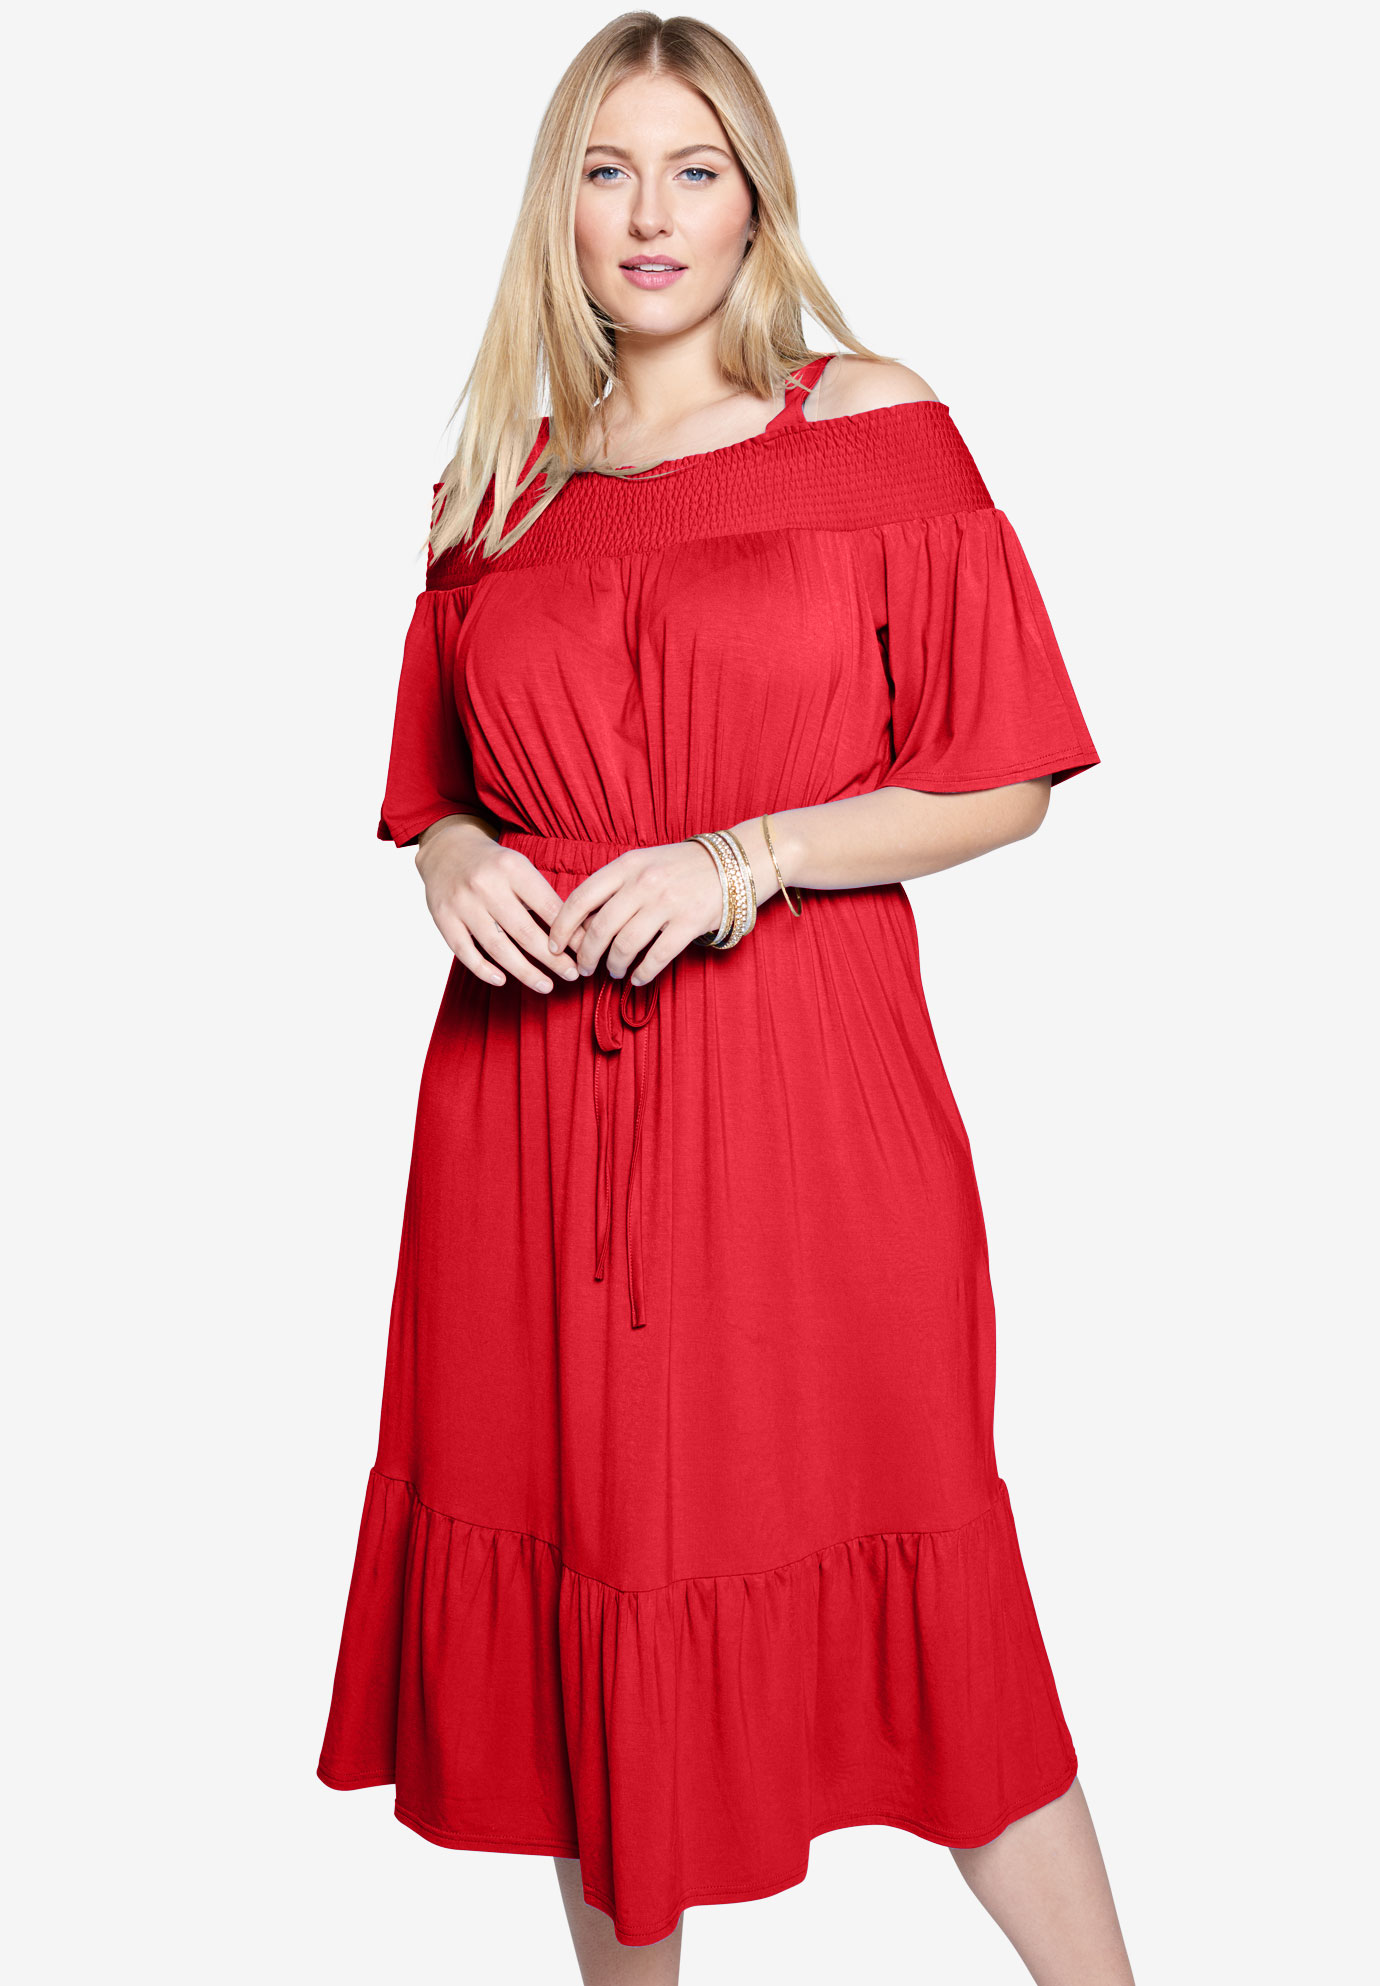 Off the Shoulder Dress| Plus Size Casual Dresses | Full Beauty